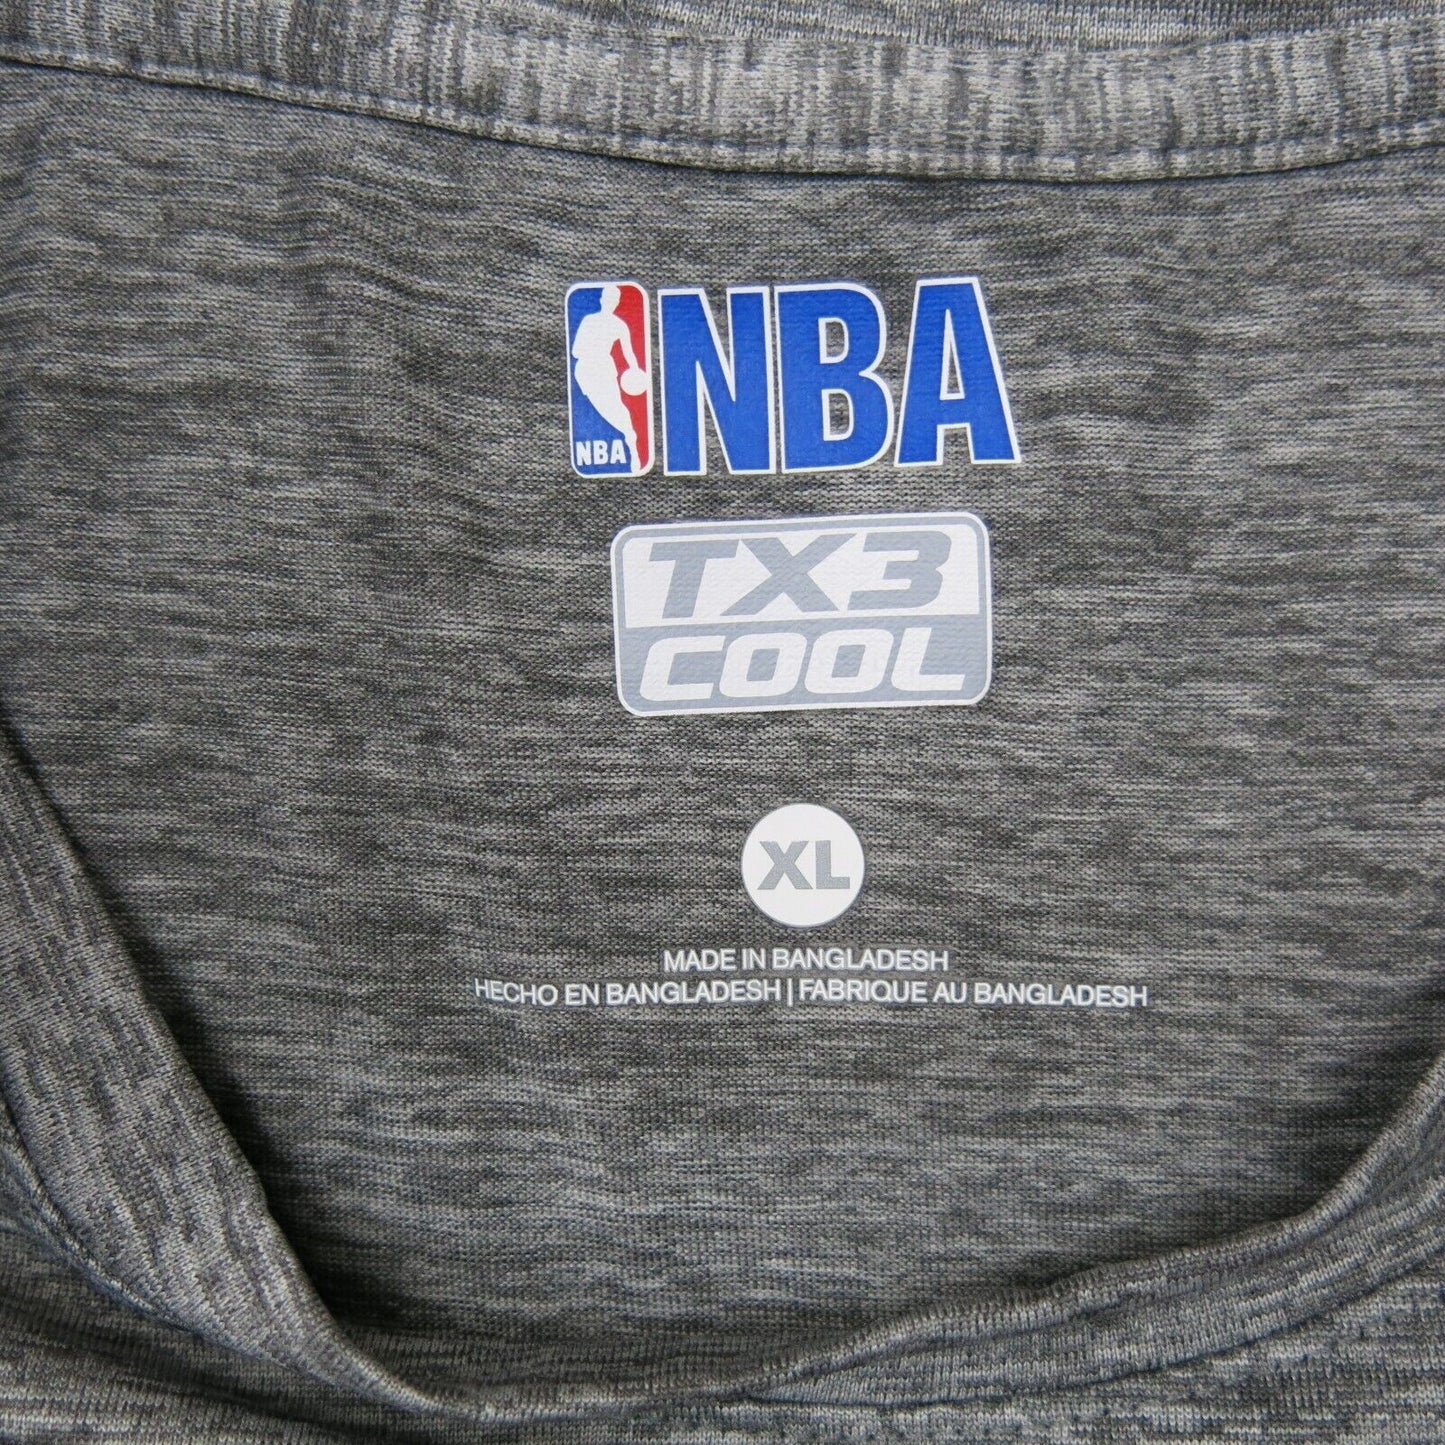 NBA Mens Pullover Sweater Top Long Sleeves Crew Neck Heather Gray Size X Large